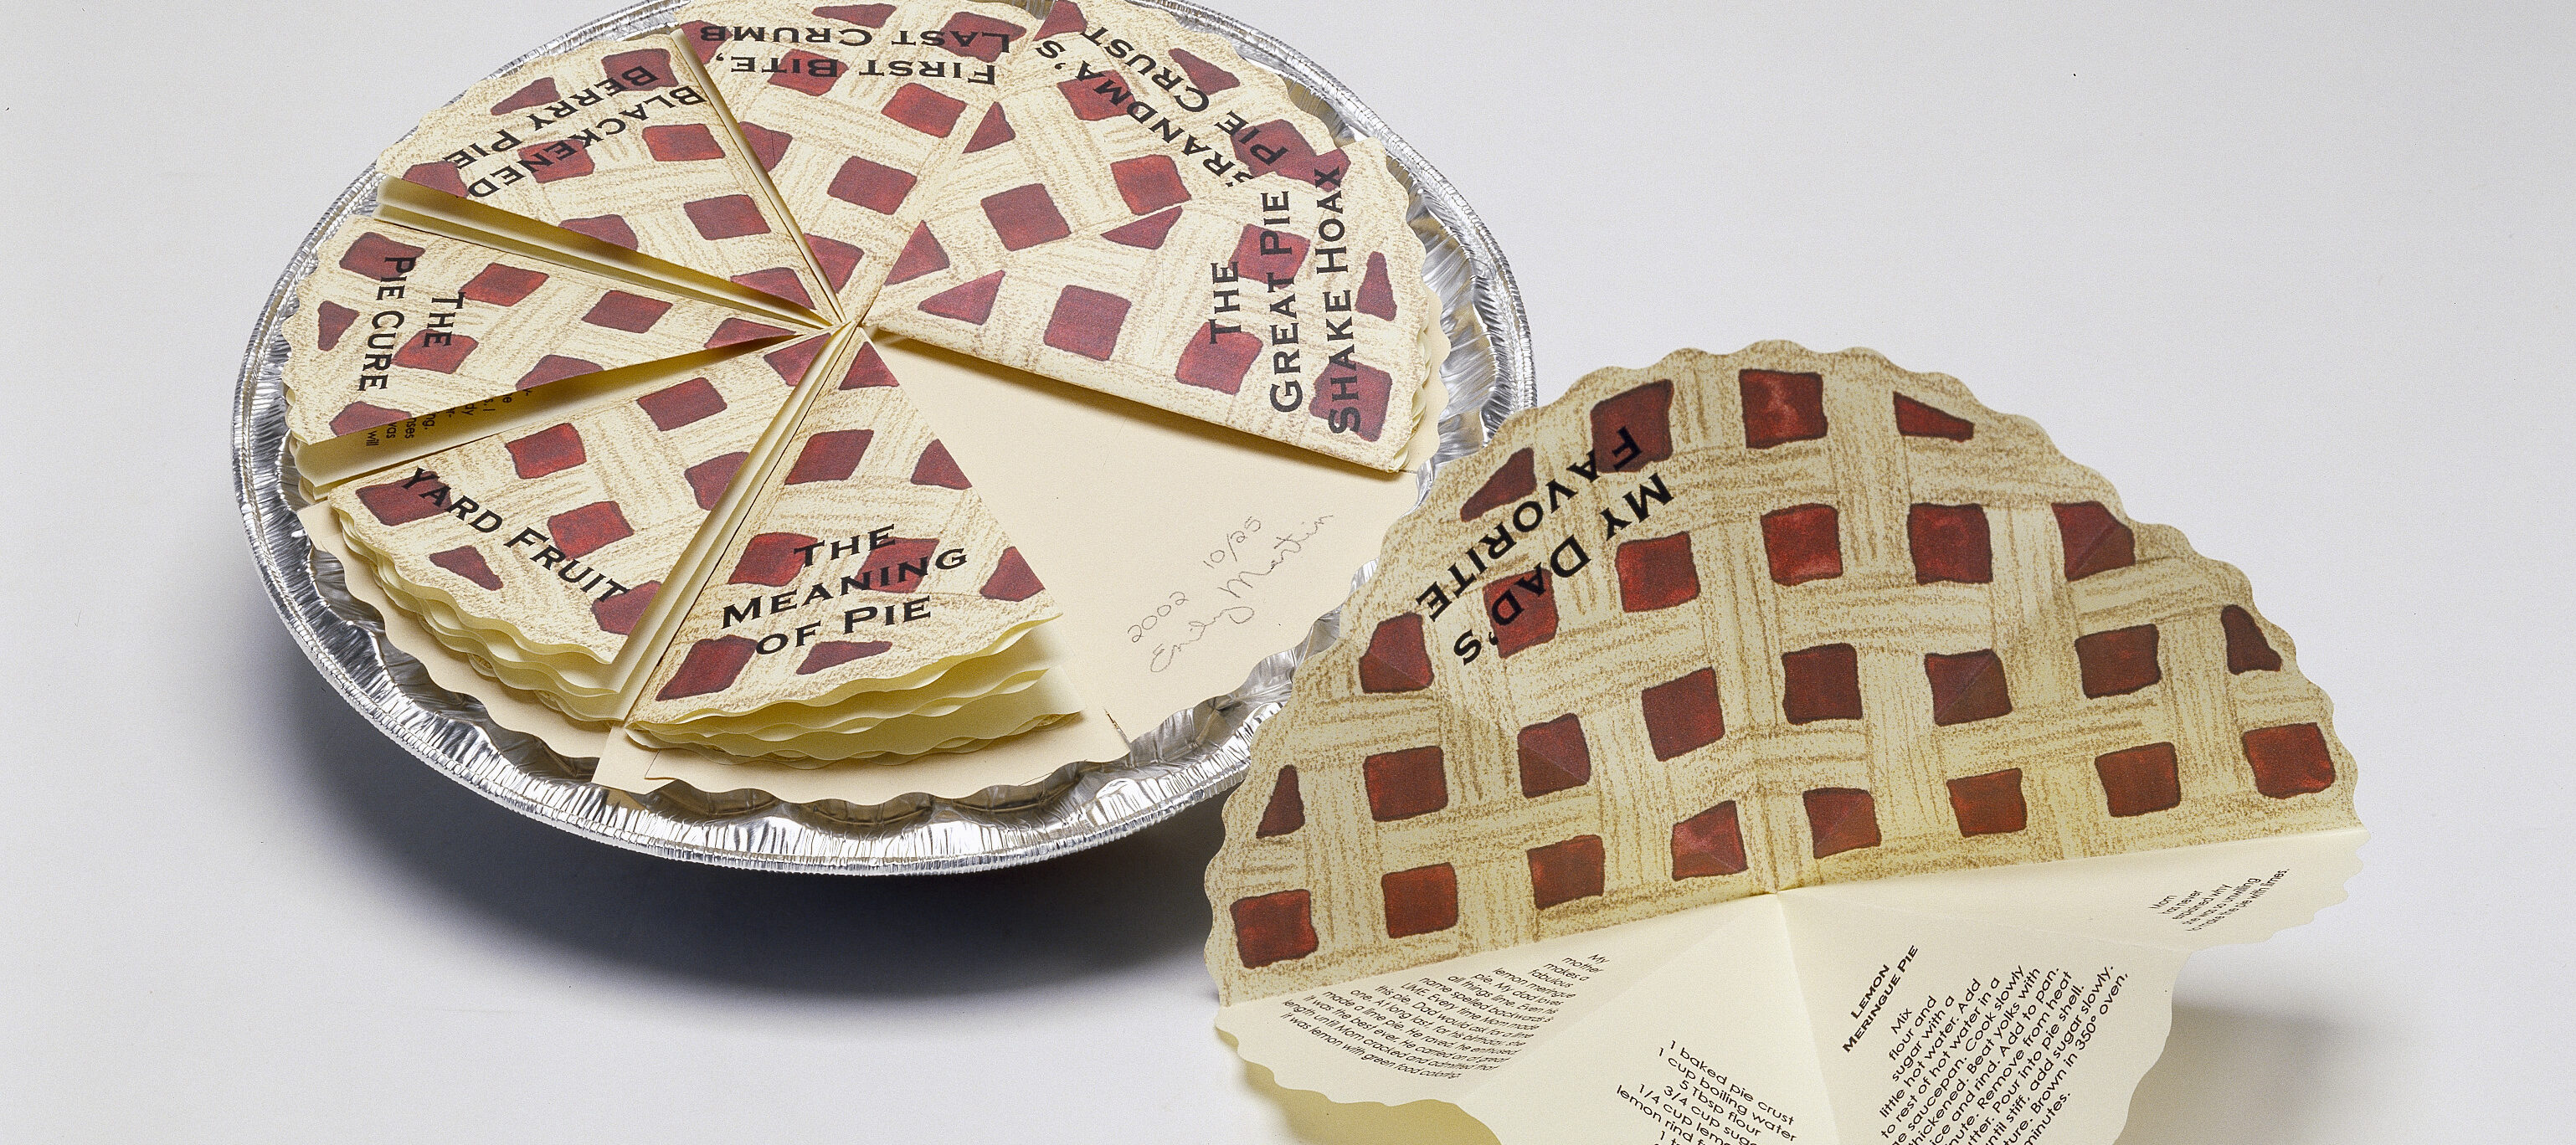 A pie tin filled with eight small folded pieces of paper that resemble identical slices of pie with a lattice top and red filling. Each slice is labeled with a title in black and opens, containing short stories written inside.